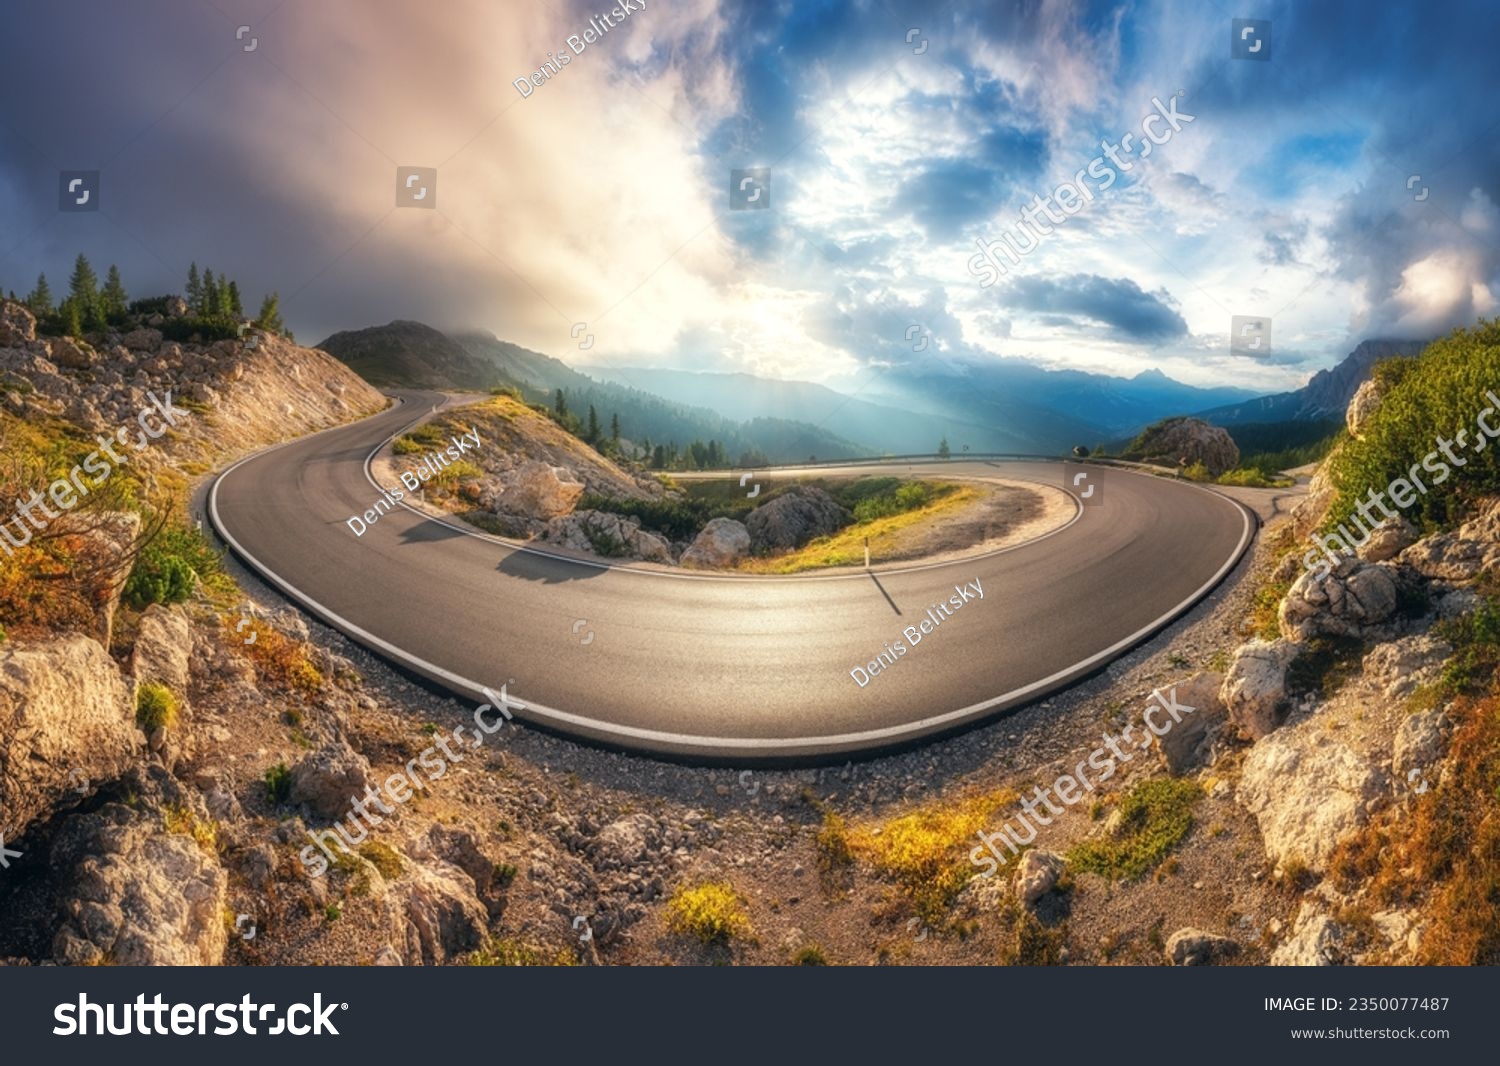 Mountain road at colorful sunset in summer. Dolomites, Italy. Beautiful curved roadway, rocks, stones, blue sky with clouds. Landscape with empty highway through the mountain pass in spring. Panorama #2350077487